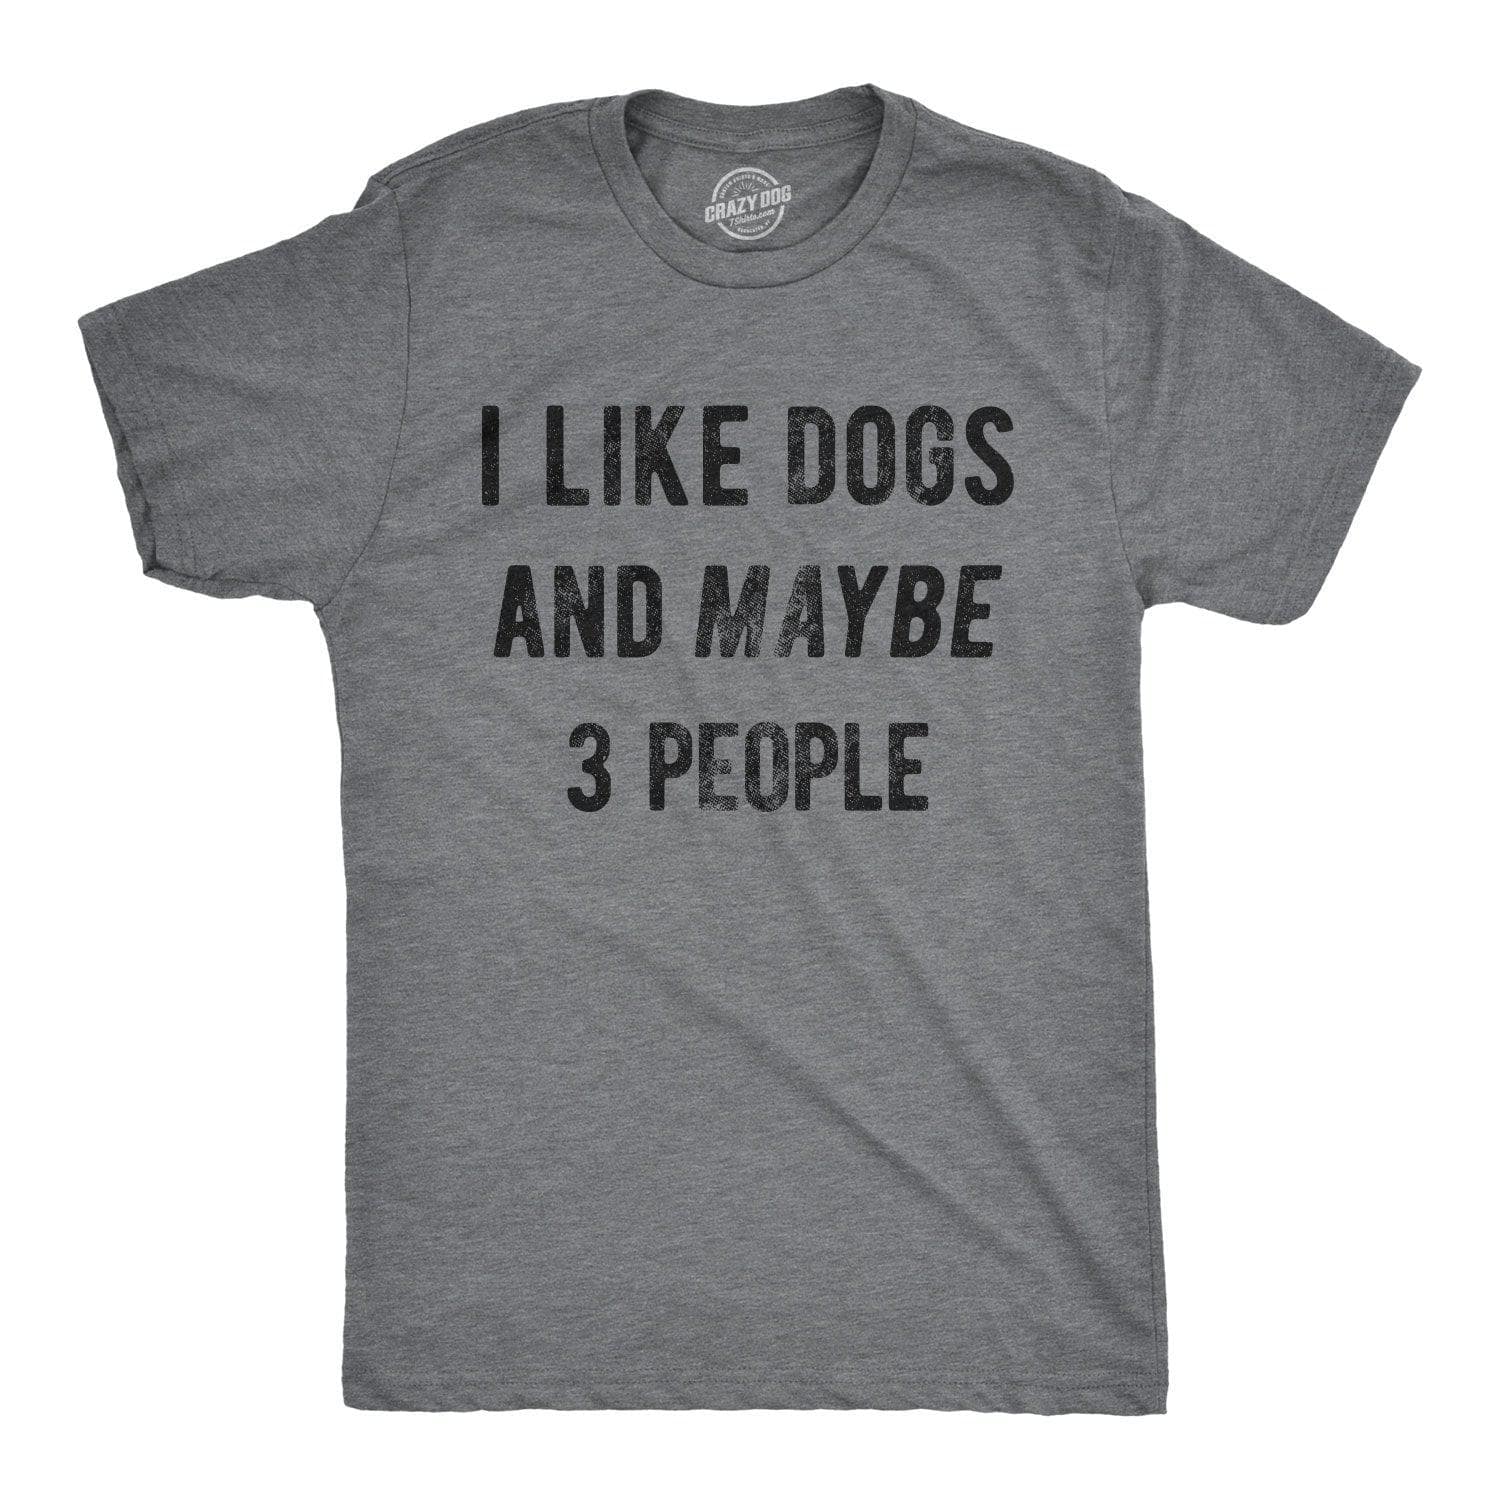 I Like Dogs And Maybe 3 People Men's Tshirt  -  Crazy Dog T-Shirts